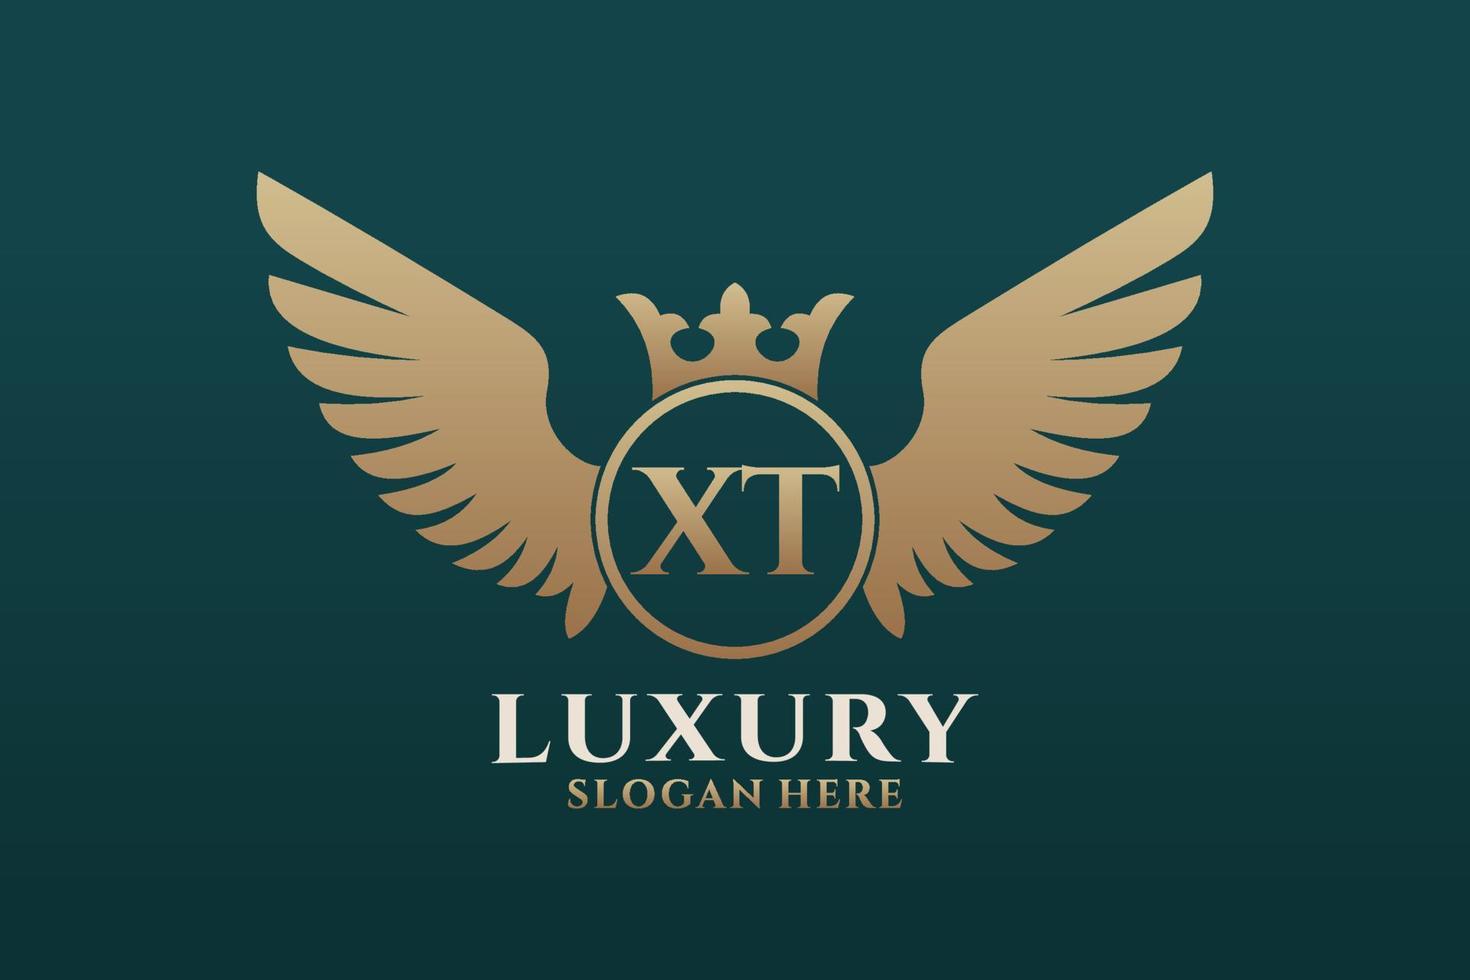 Luxury royal wing Letter XT crest Gold color Logo vector, Victory logo, crest logo, wing logo, vector logo template.